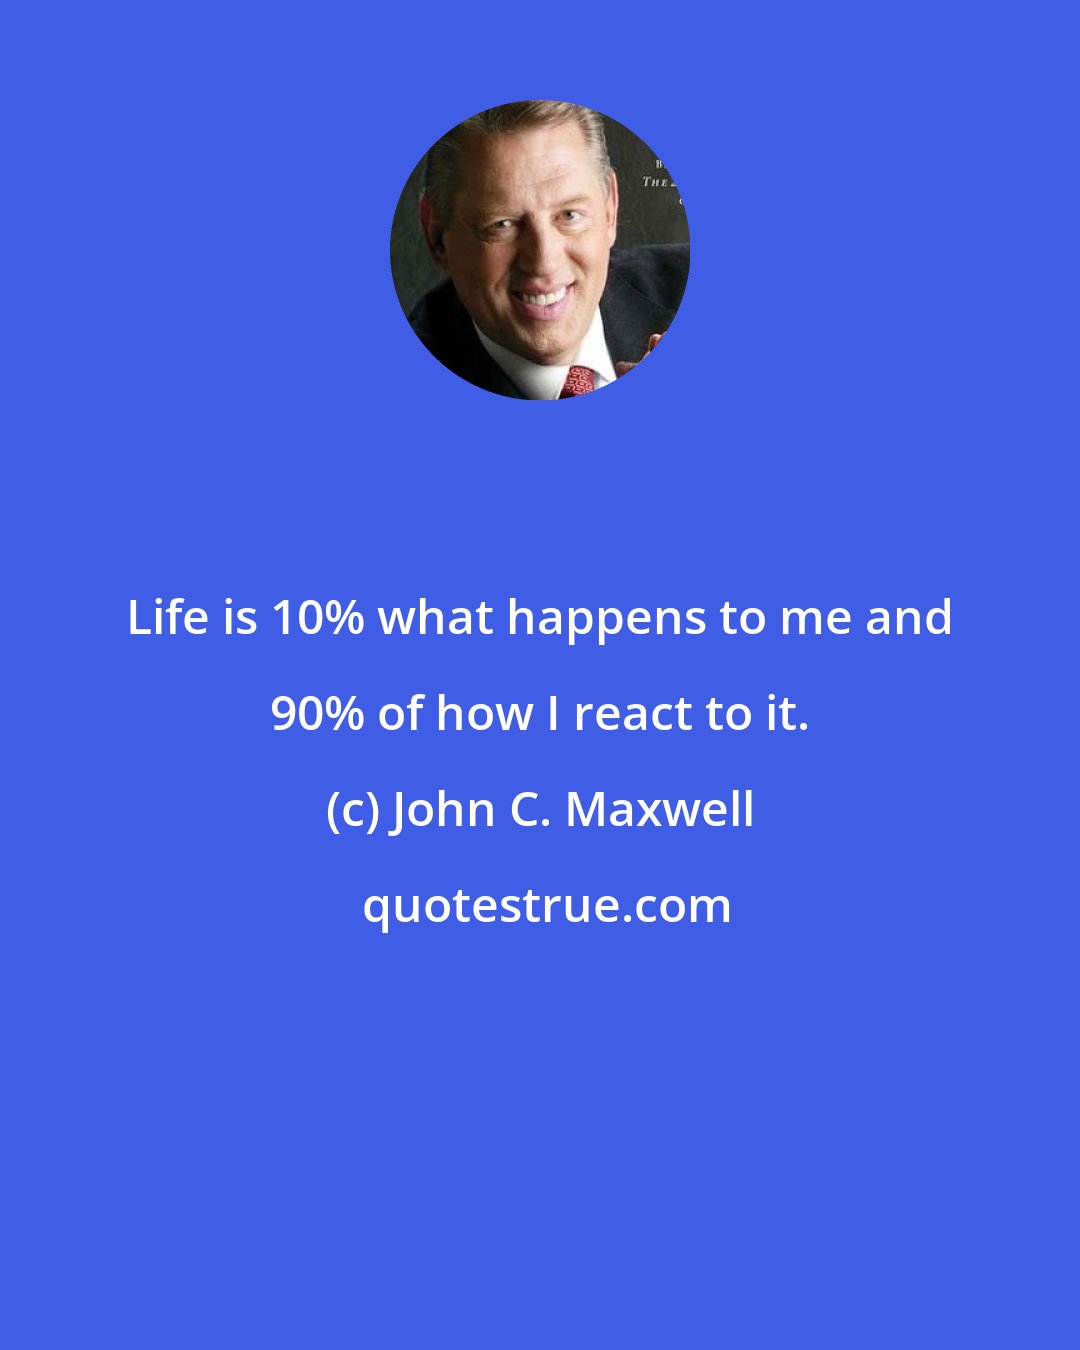 John C. Maxwell: Life is 10% what happens to me and 90% of how I react to it.